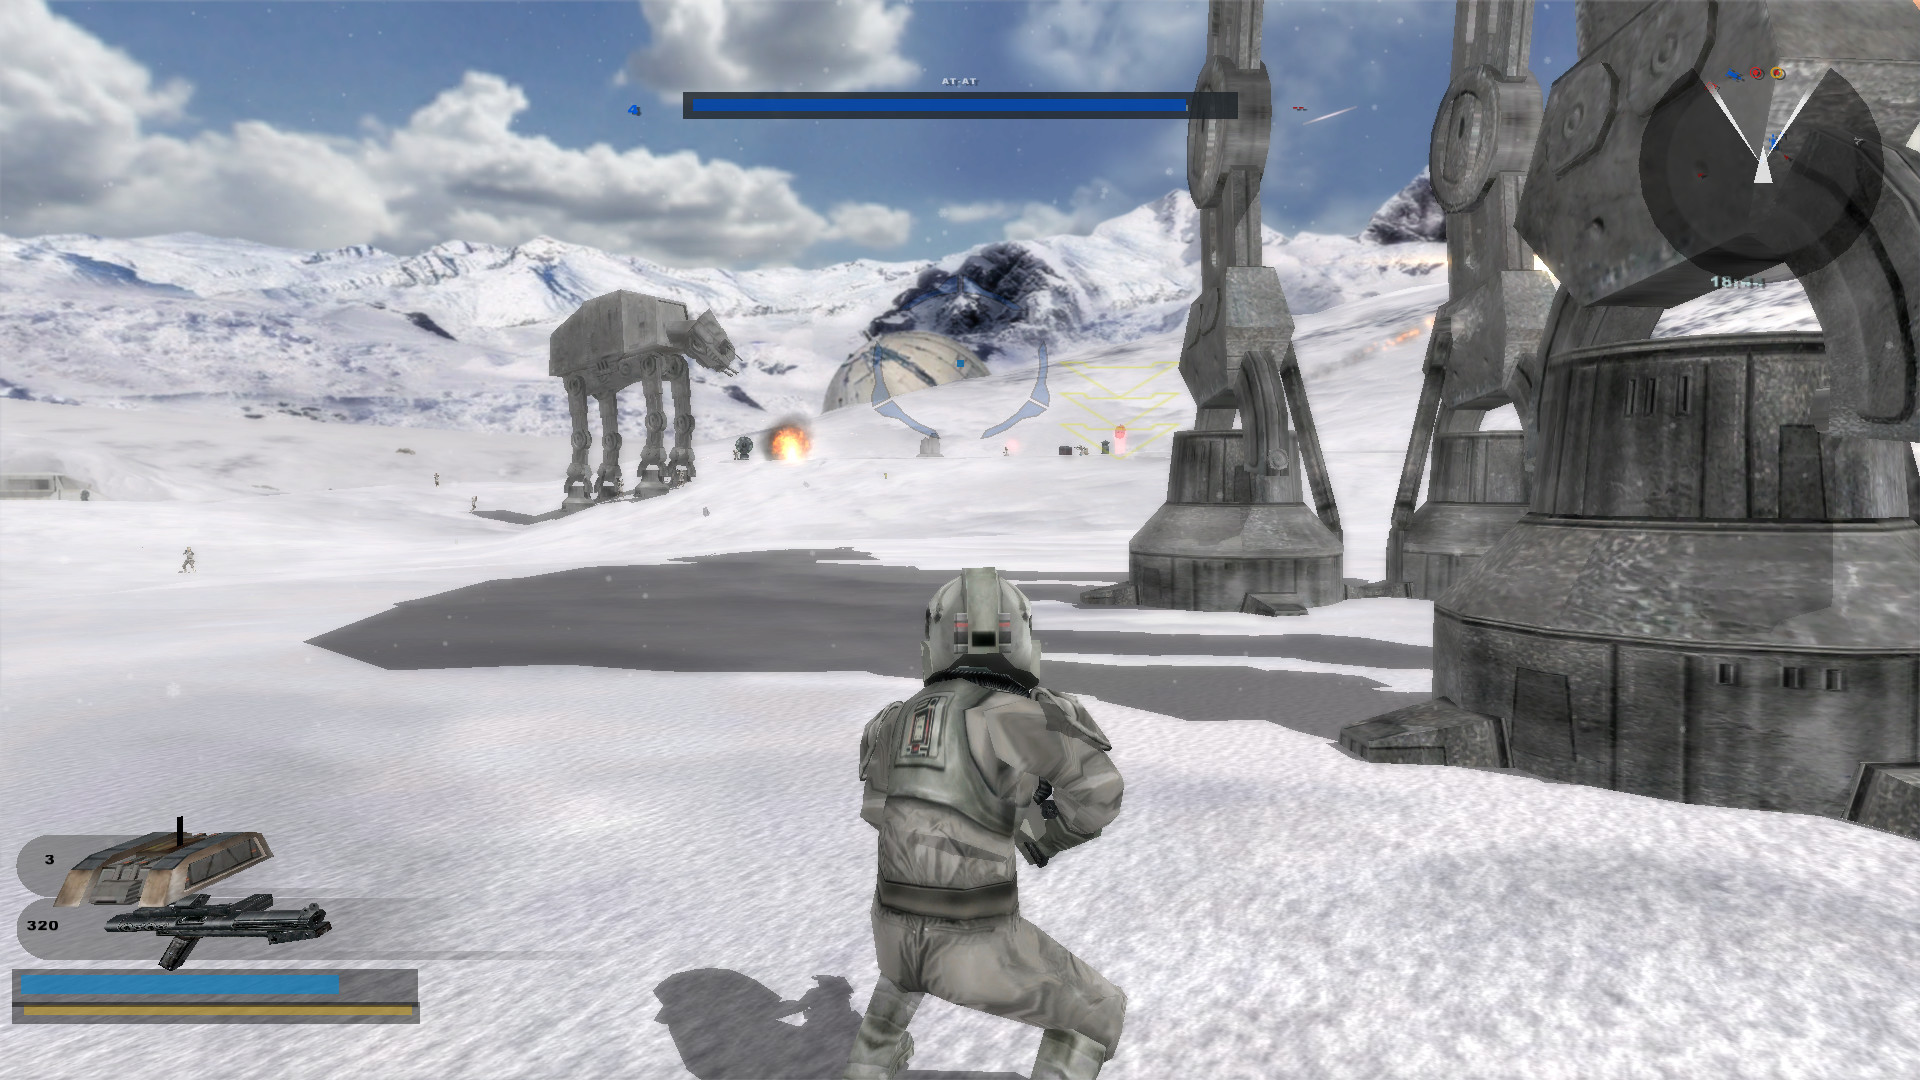 Pandemic's old Star Wars Battlefront 2 gets multiplayer support from GOG